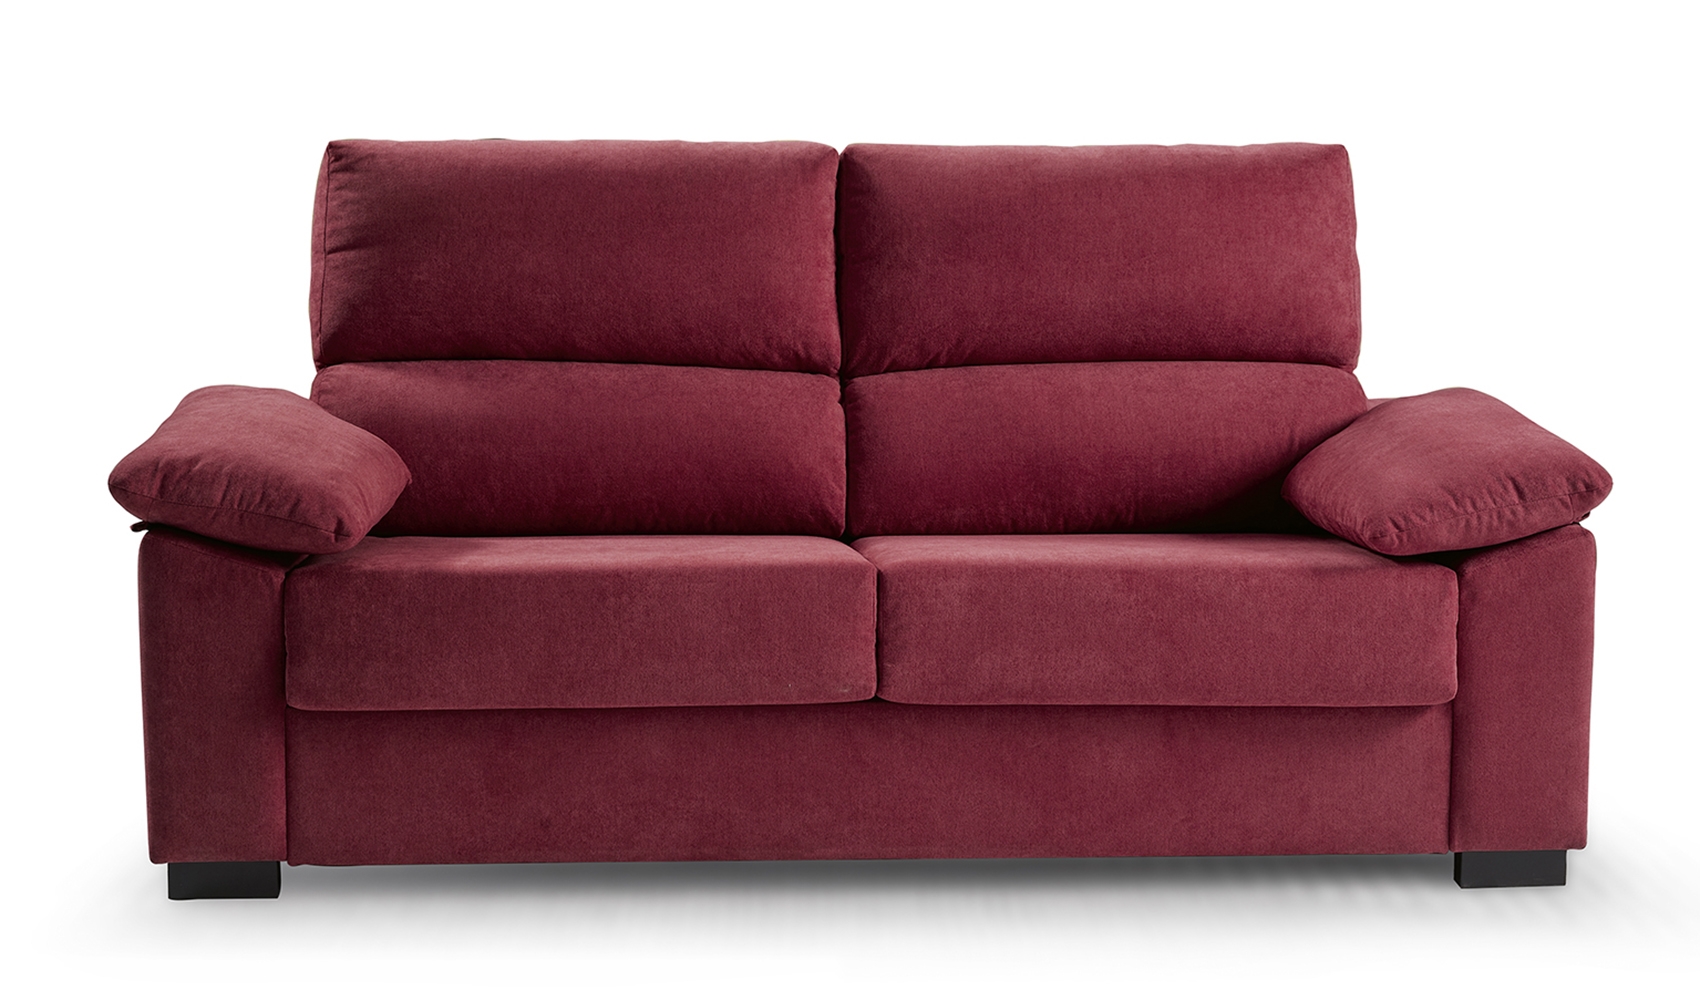 Leyre Sofa bed 